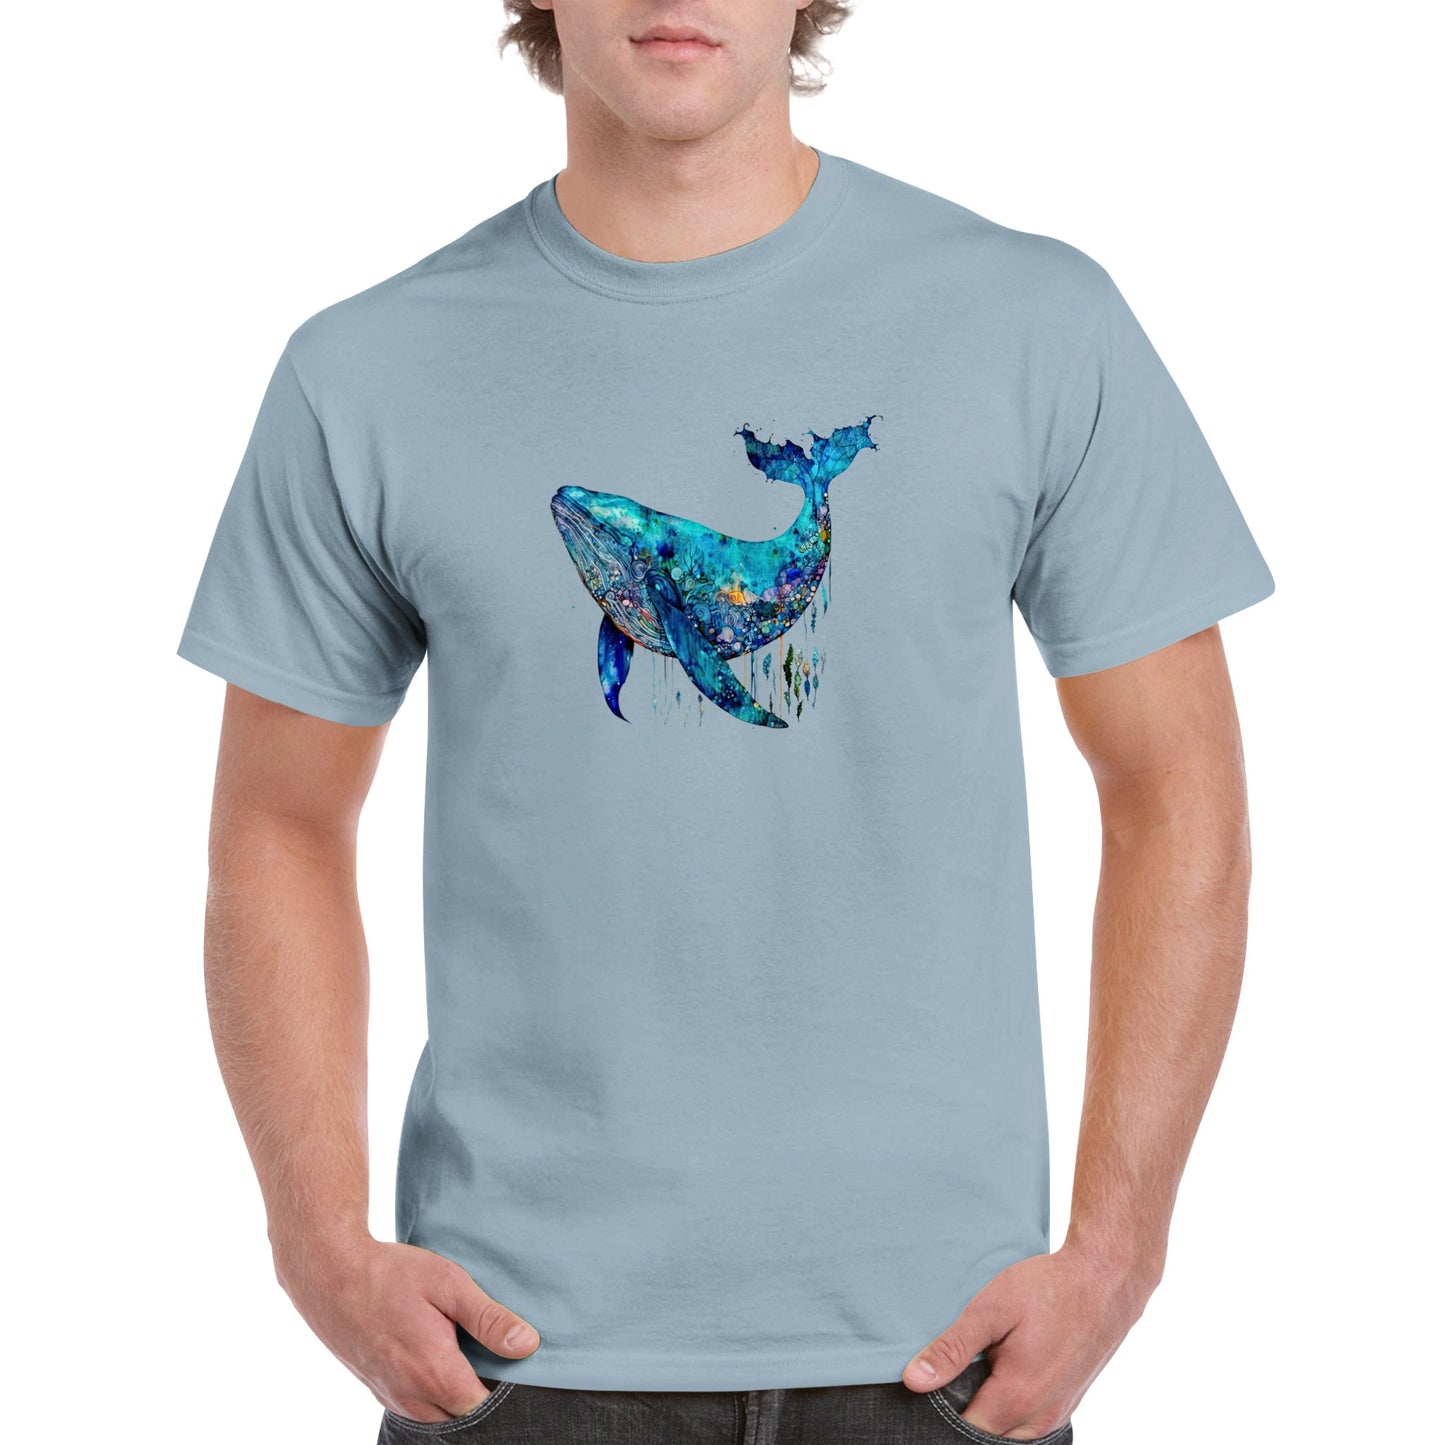 Guy wearing a light blue t-shirt with a blue whale print